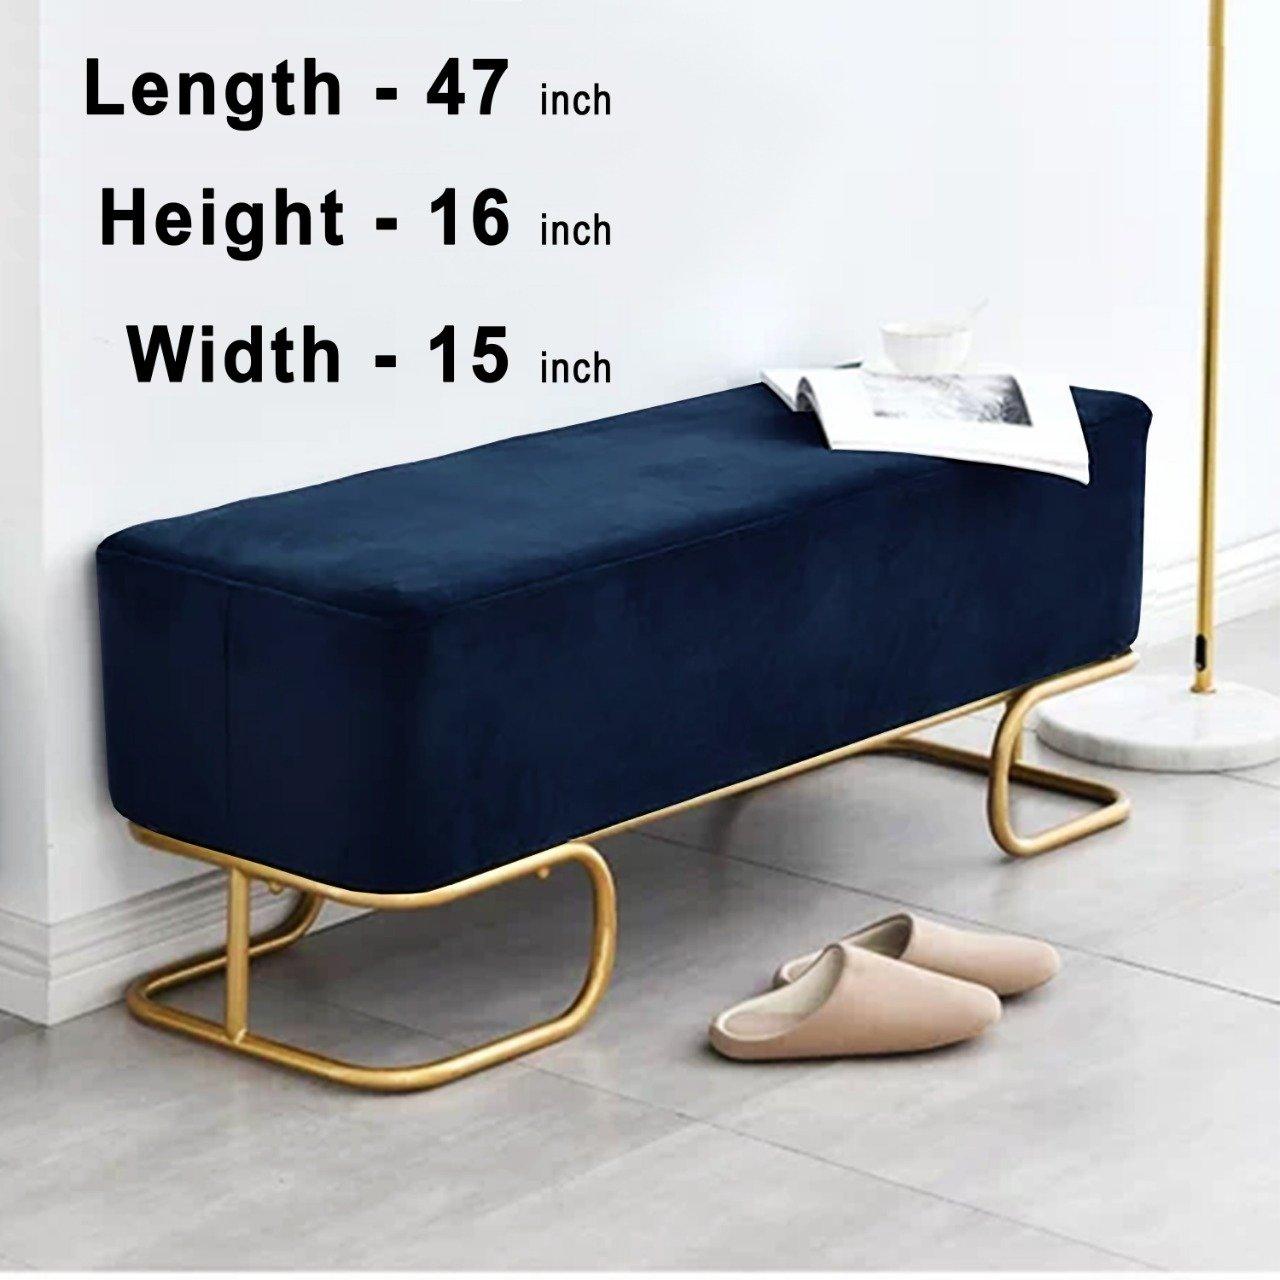 Luxury Wooden stool 3 Seater With Steel Stand -325 - 92Bedding